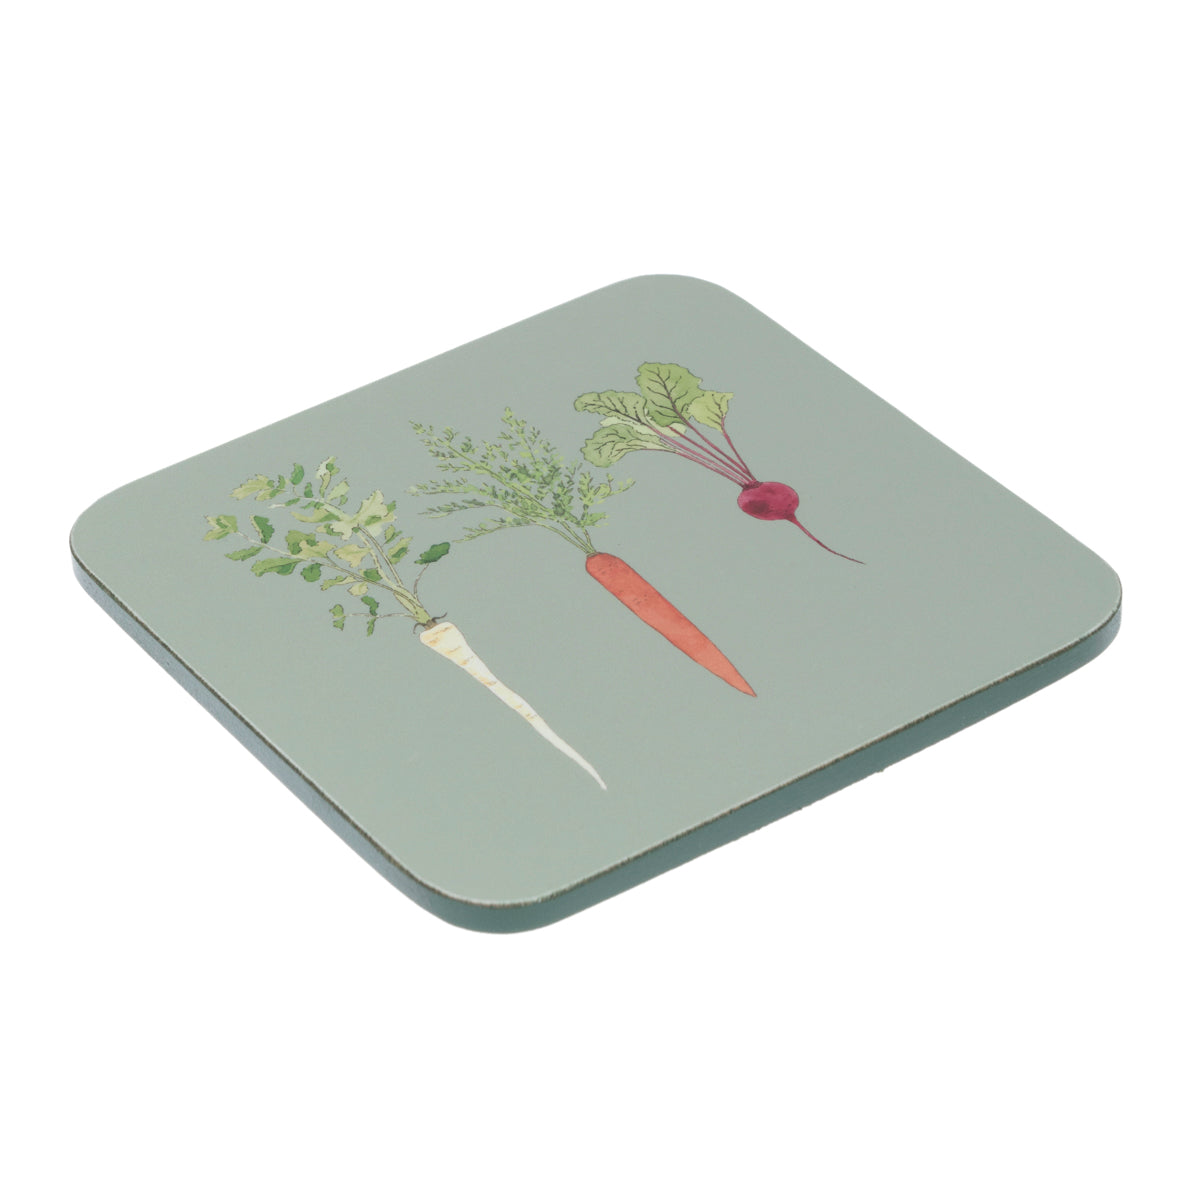 Home Grown Coasters (Set of 4) by Sophie Allport